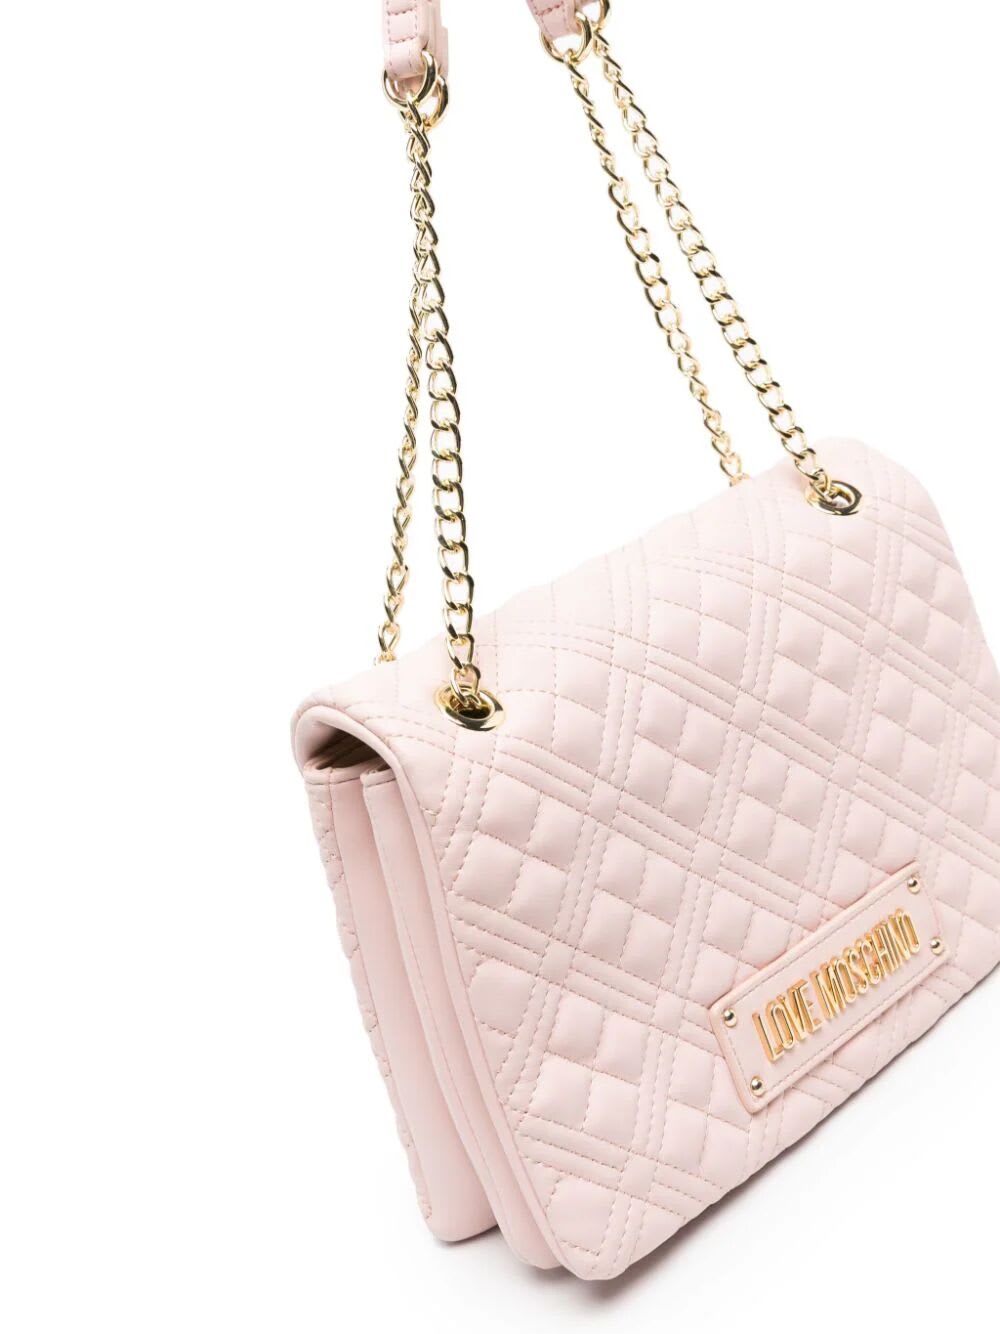 Shop Love Moschino Quilted Shoulder Bag In Powder